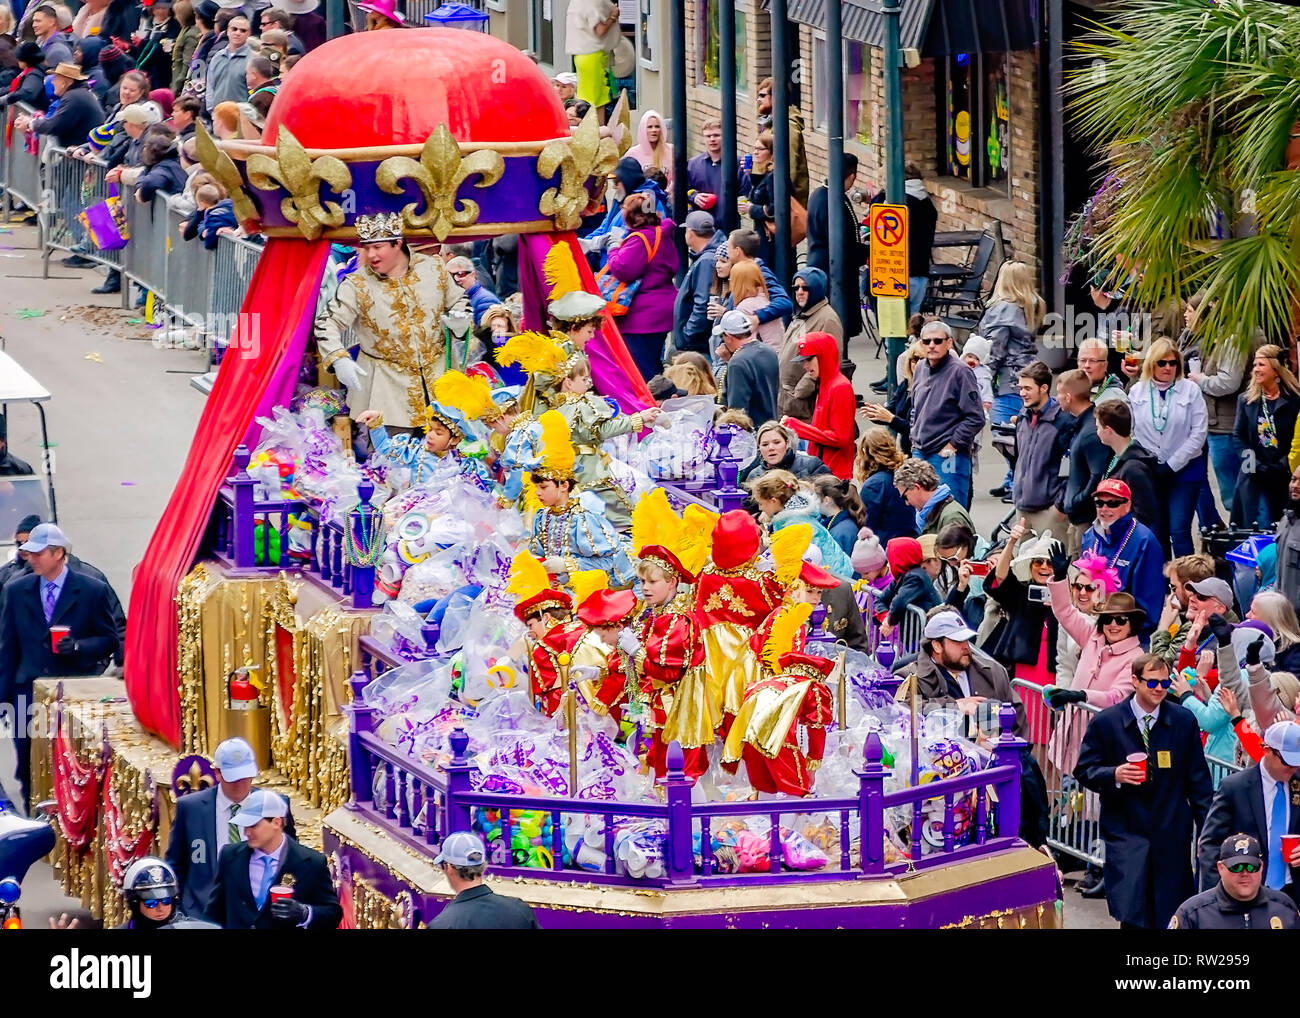 Mobile, Alabama, USA. 4th March, 2019. The Mobile Carnival Association’s King Felix III (Alexander Travis 'Sandy' Howard IV) and his court travel down Royal Street during Mardi Gras, March 4, 2019, in Mobile, Alabama. Mobile’s first official Mardi Gras celebration was recorded in 1703. Mardi Gras originated as a French tradition of feasting and revelry before the austere Catholic Lent. Mardi Gras officially ends on Fat Tuesday. Credit: Carmen K. Sisson/Cloudybright/Alamy Live News Stock Photo